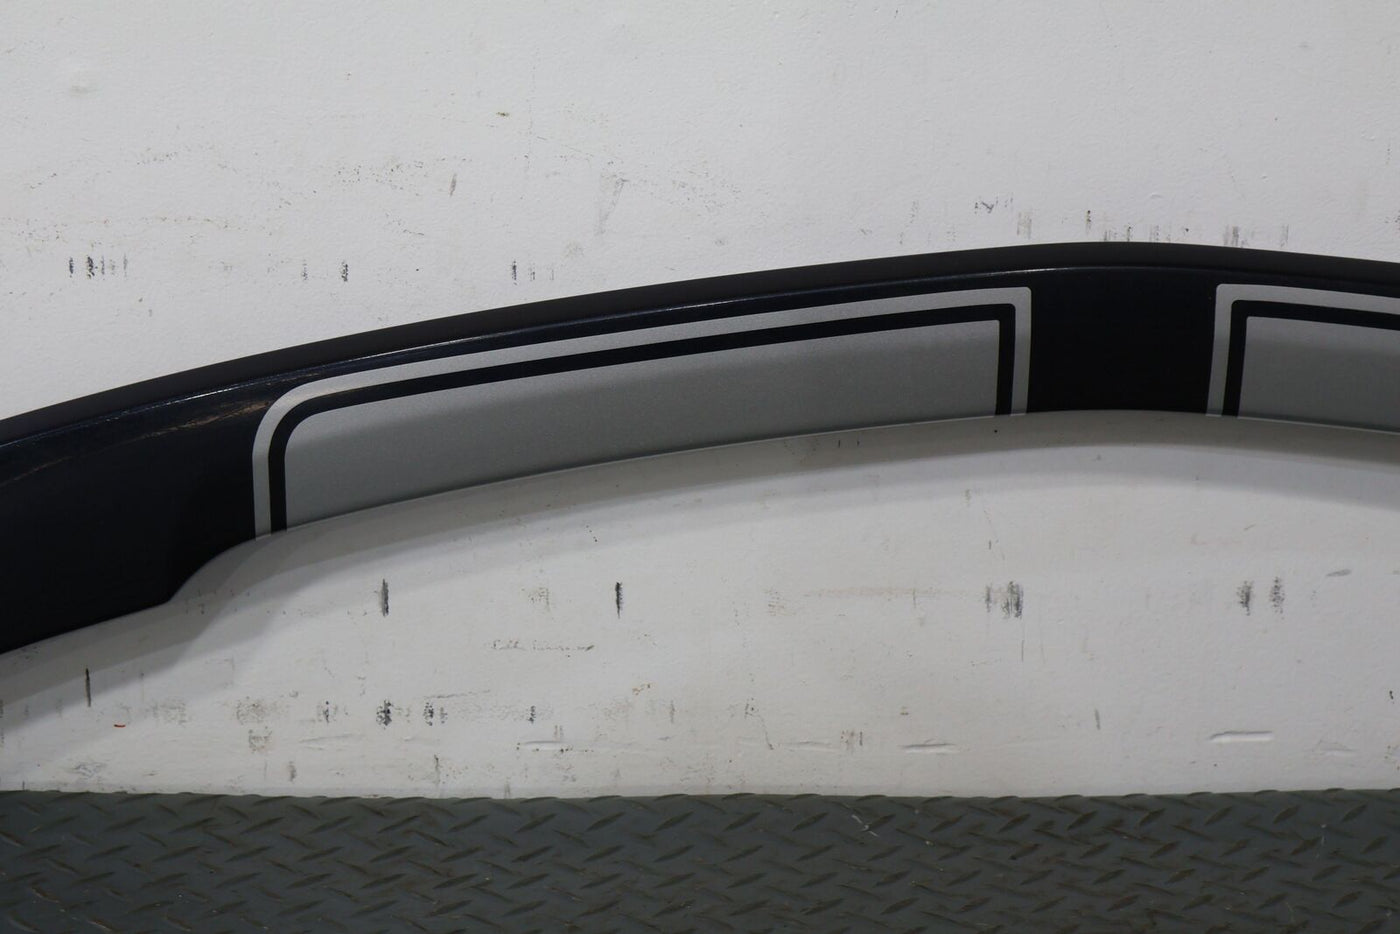 2013 Chevy Camaro SS OEM Rear Spoiler (Blue Ray GXH/Silver Stripes) Opt. D80